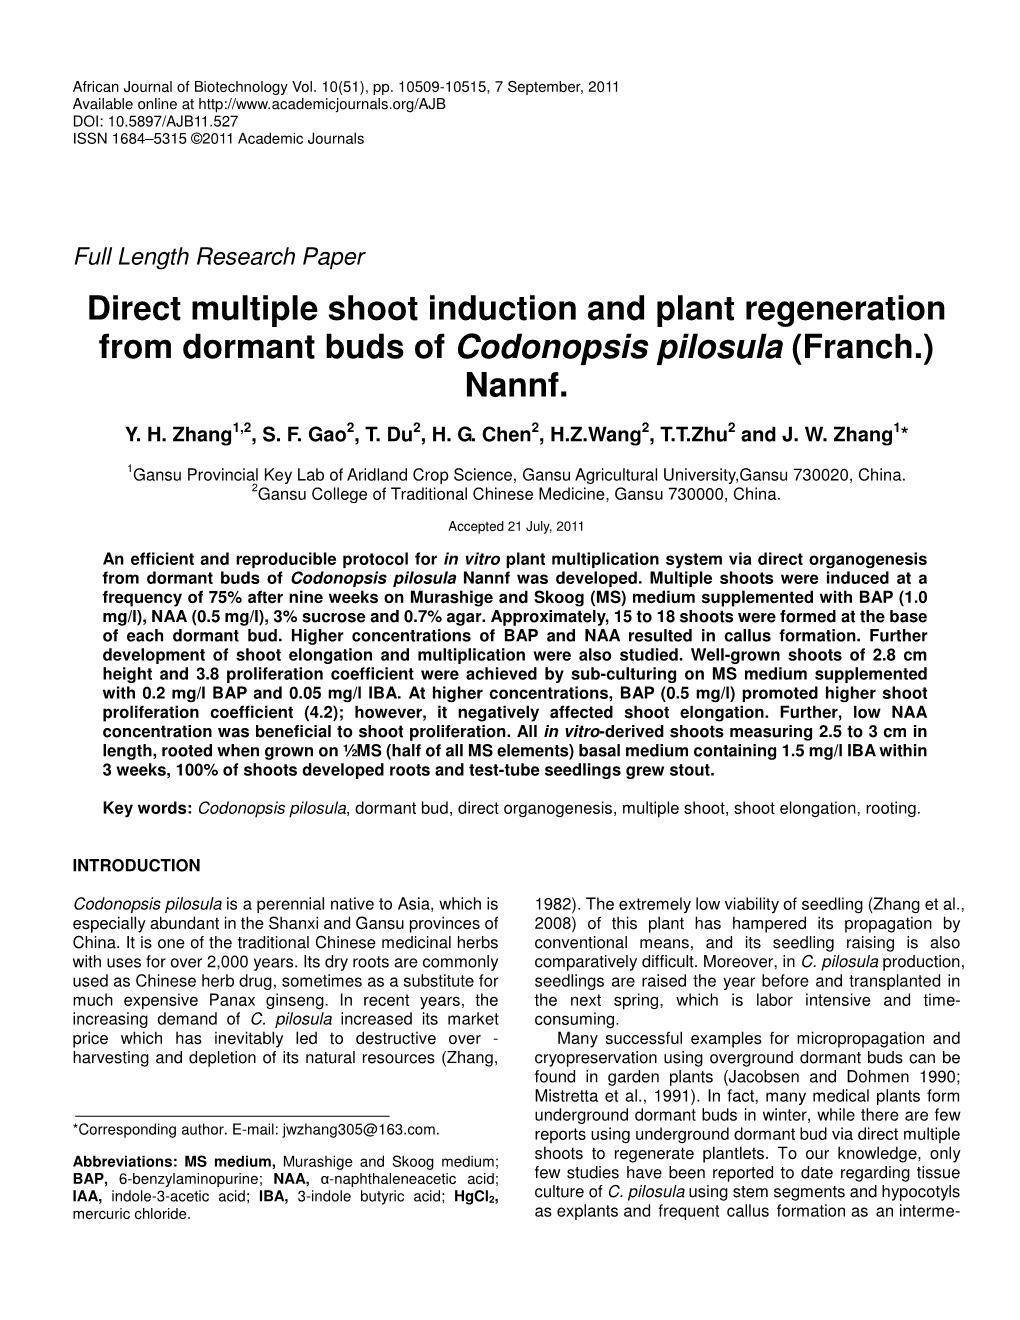 Direct Multiple Shoot Induction and Plant Regeneration from Dormant Buds of Codonopsis Pilosula (Franch.) Nannf